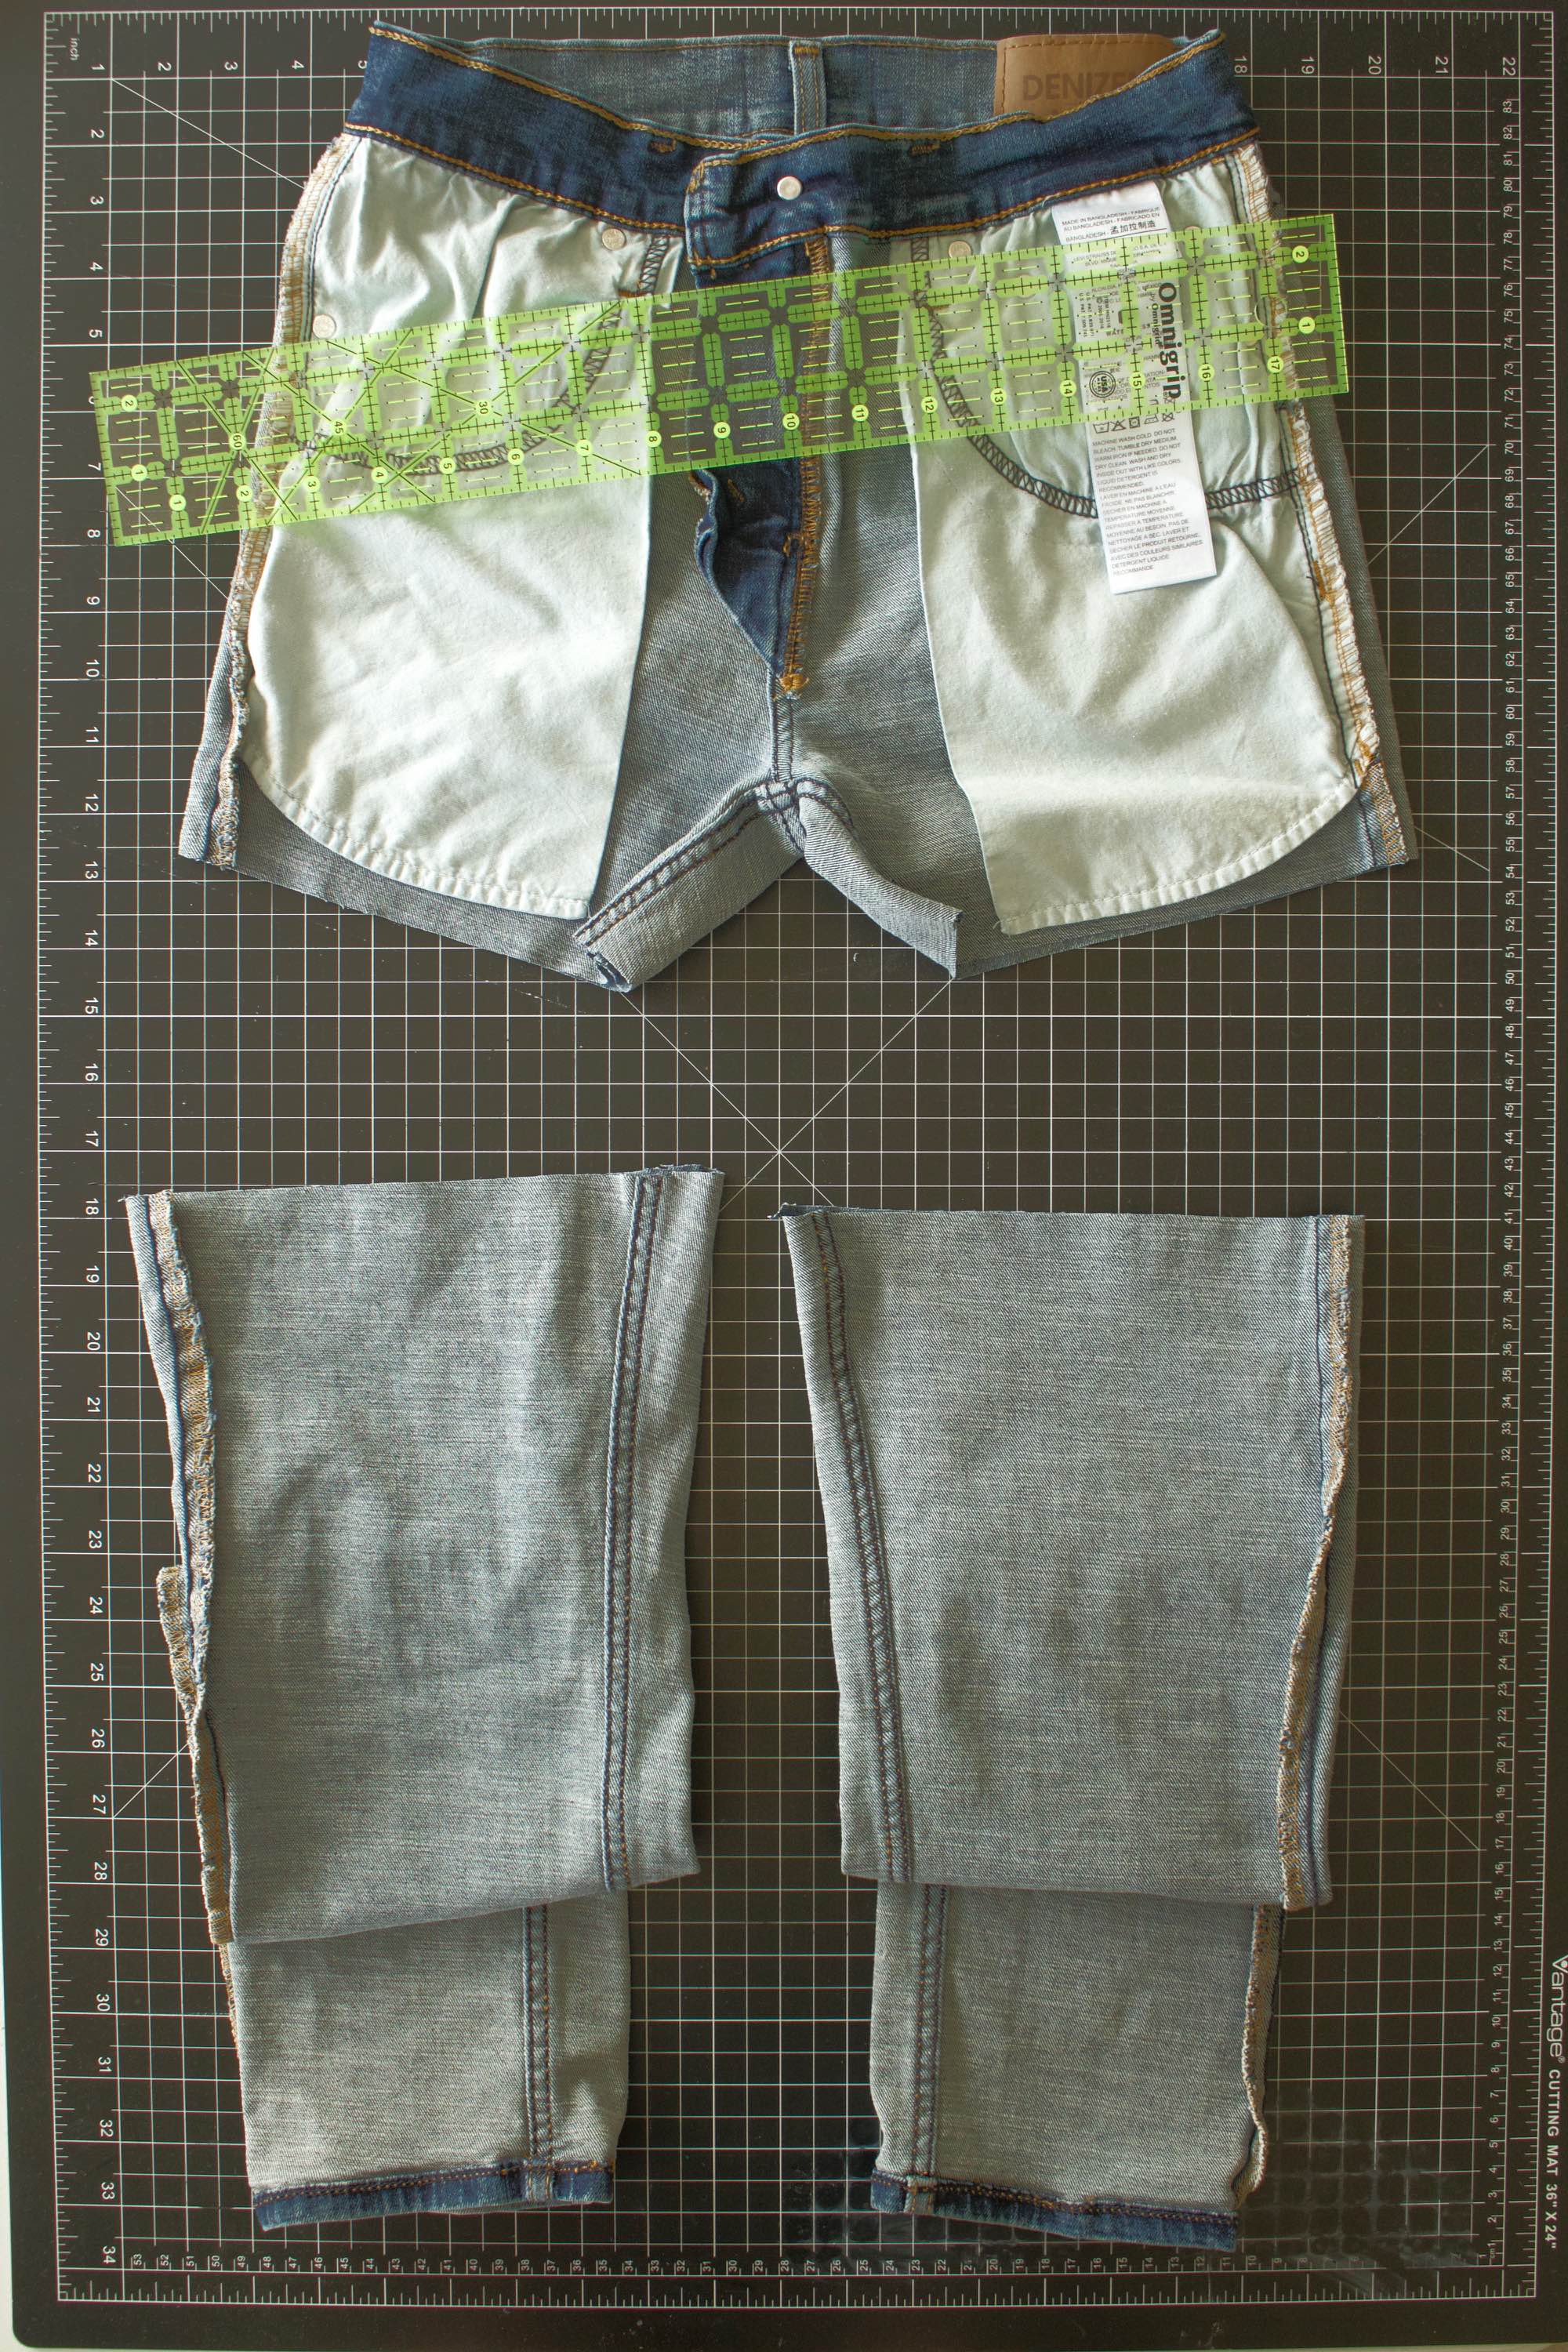 Photo of the jeans with the legs cut off.